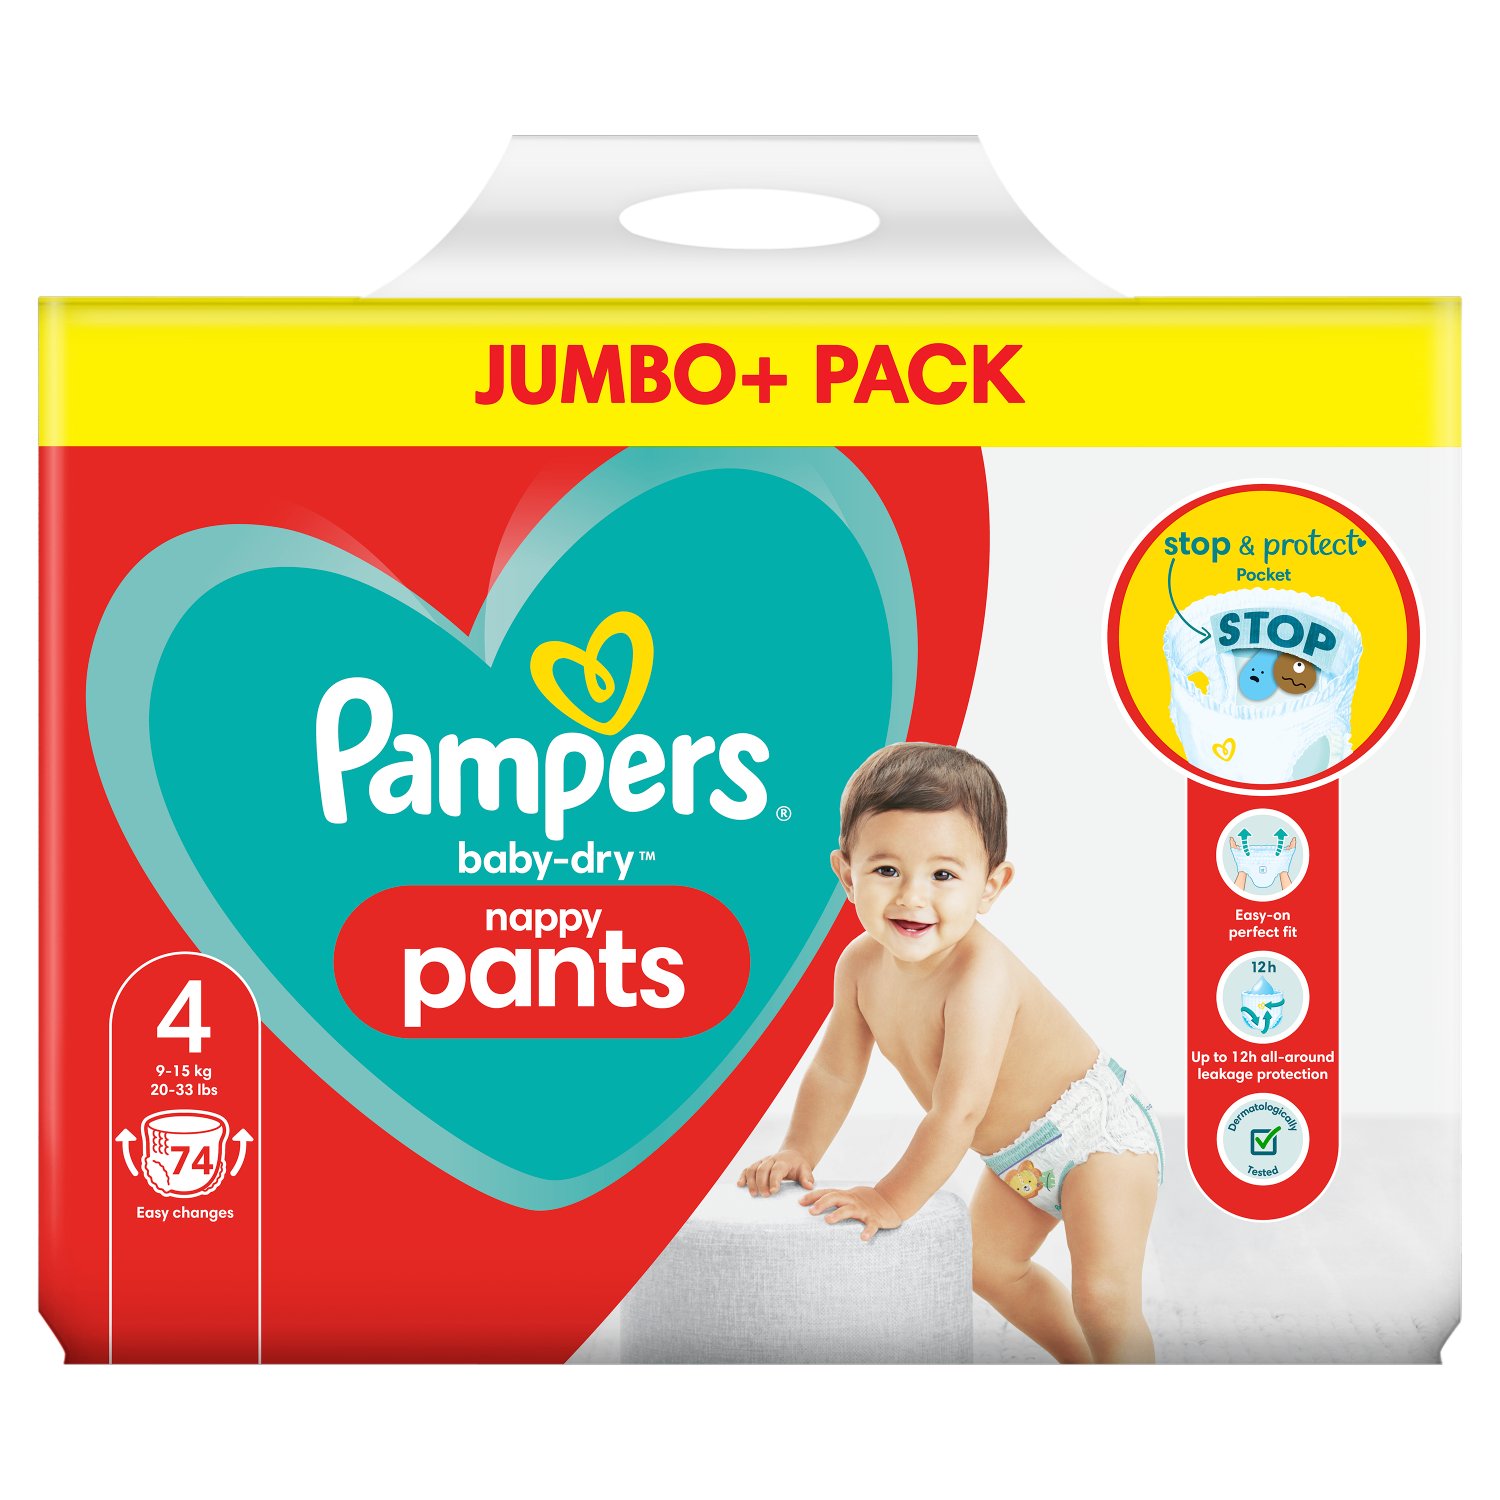 Pampers Baby-Dry Nappy Pants Size 4 Jumbo+ Pack 74pce (74 Piece)